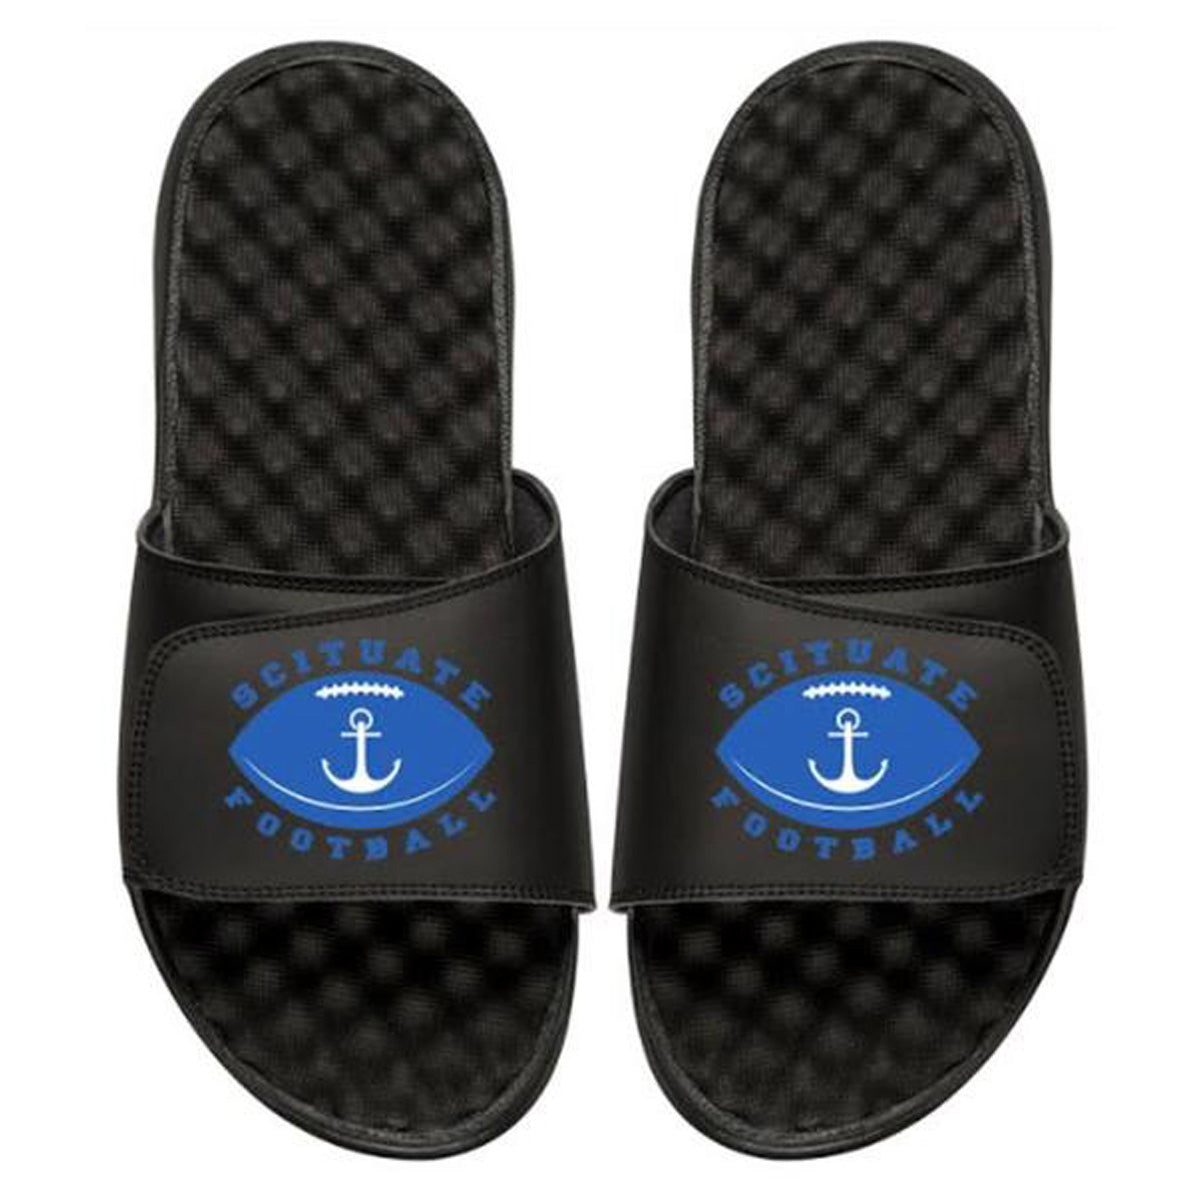 Scituate Football Slides